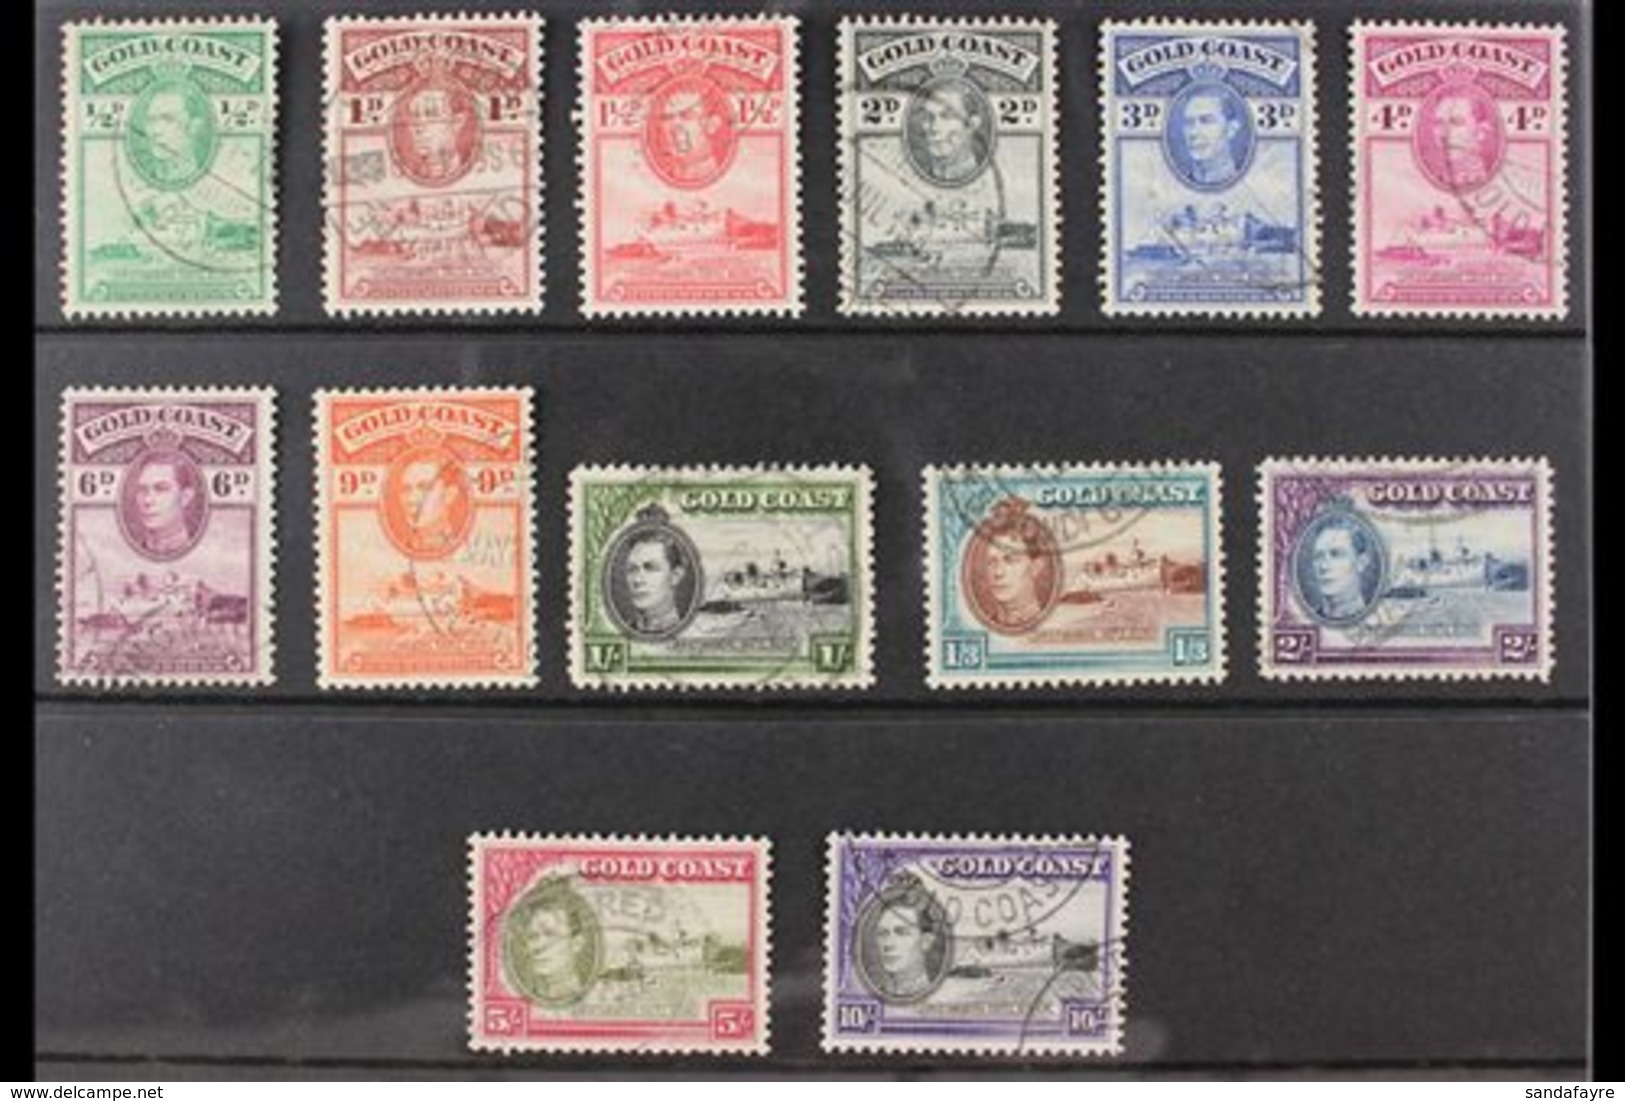 1938-43 Christiansborg Castle Complete Set, SG 120/32, Very Fine Cds Used, Fresh. (13 Stamps) For More Images, Please Vi - Costa D'Oro (...-1957)